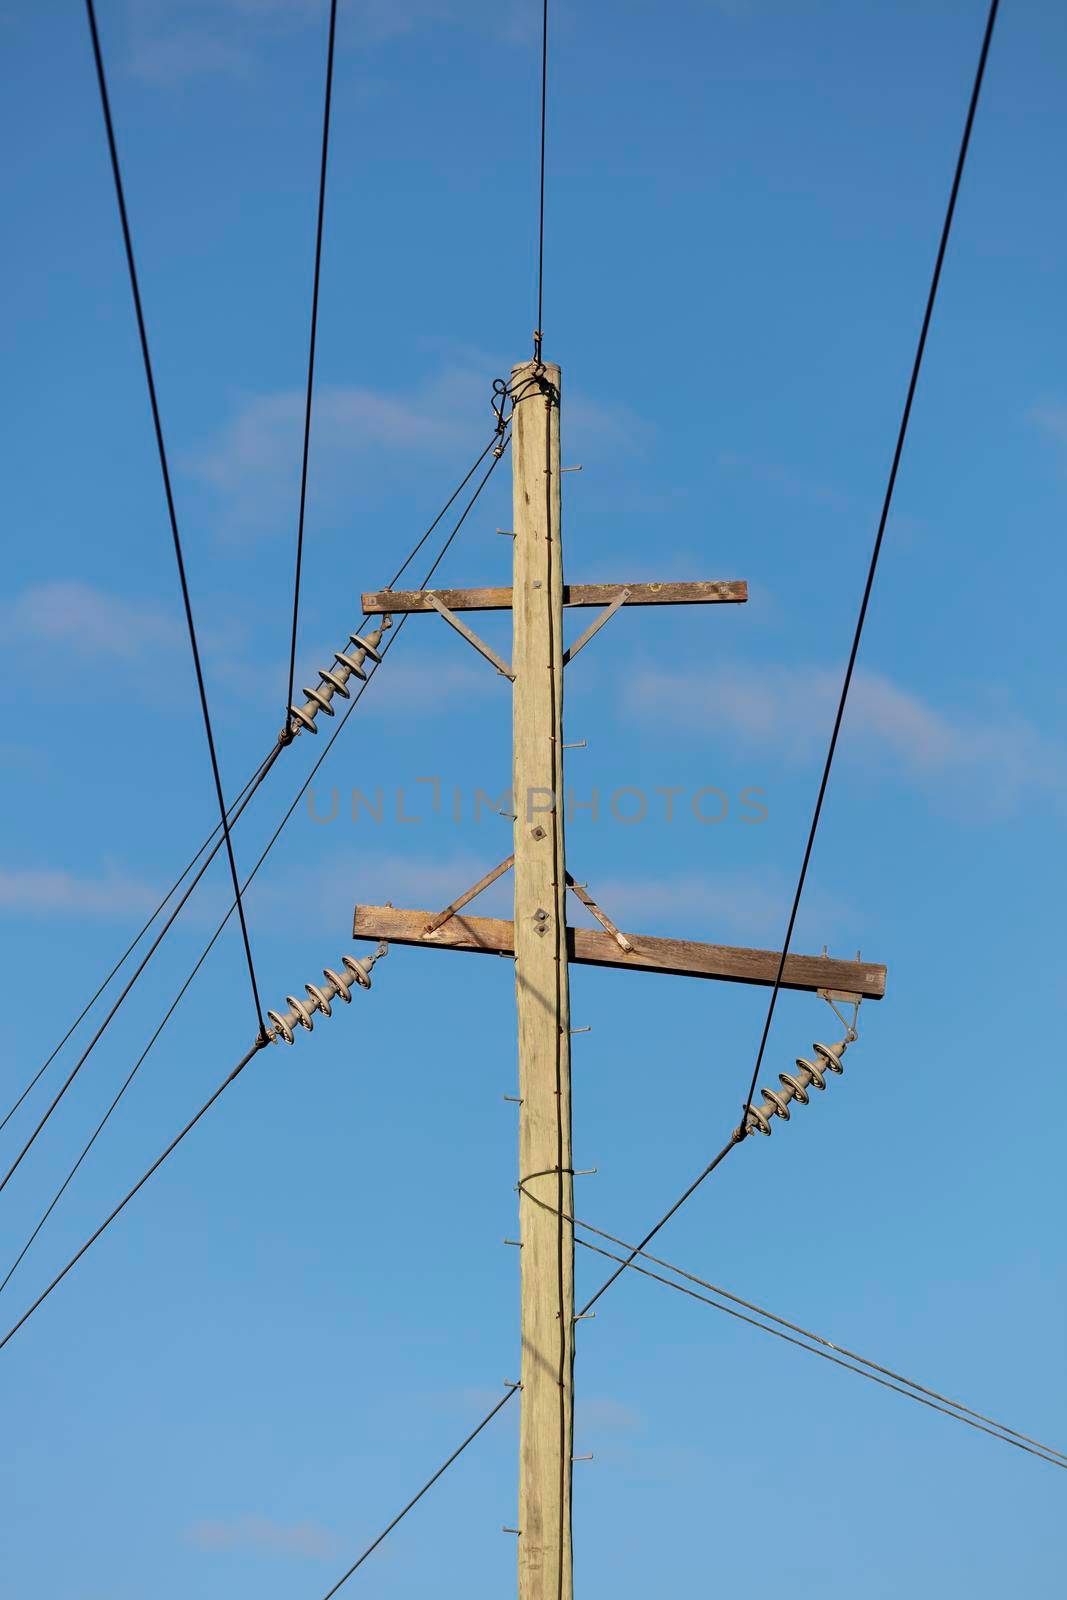 Photograph of a wooden telephone post and cables by WittkePhotos